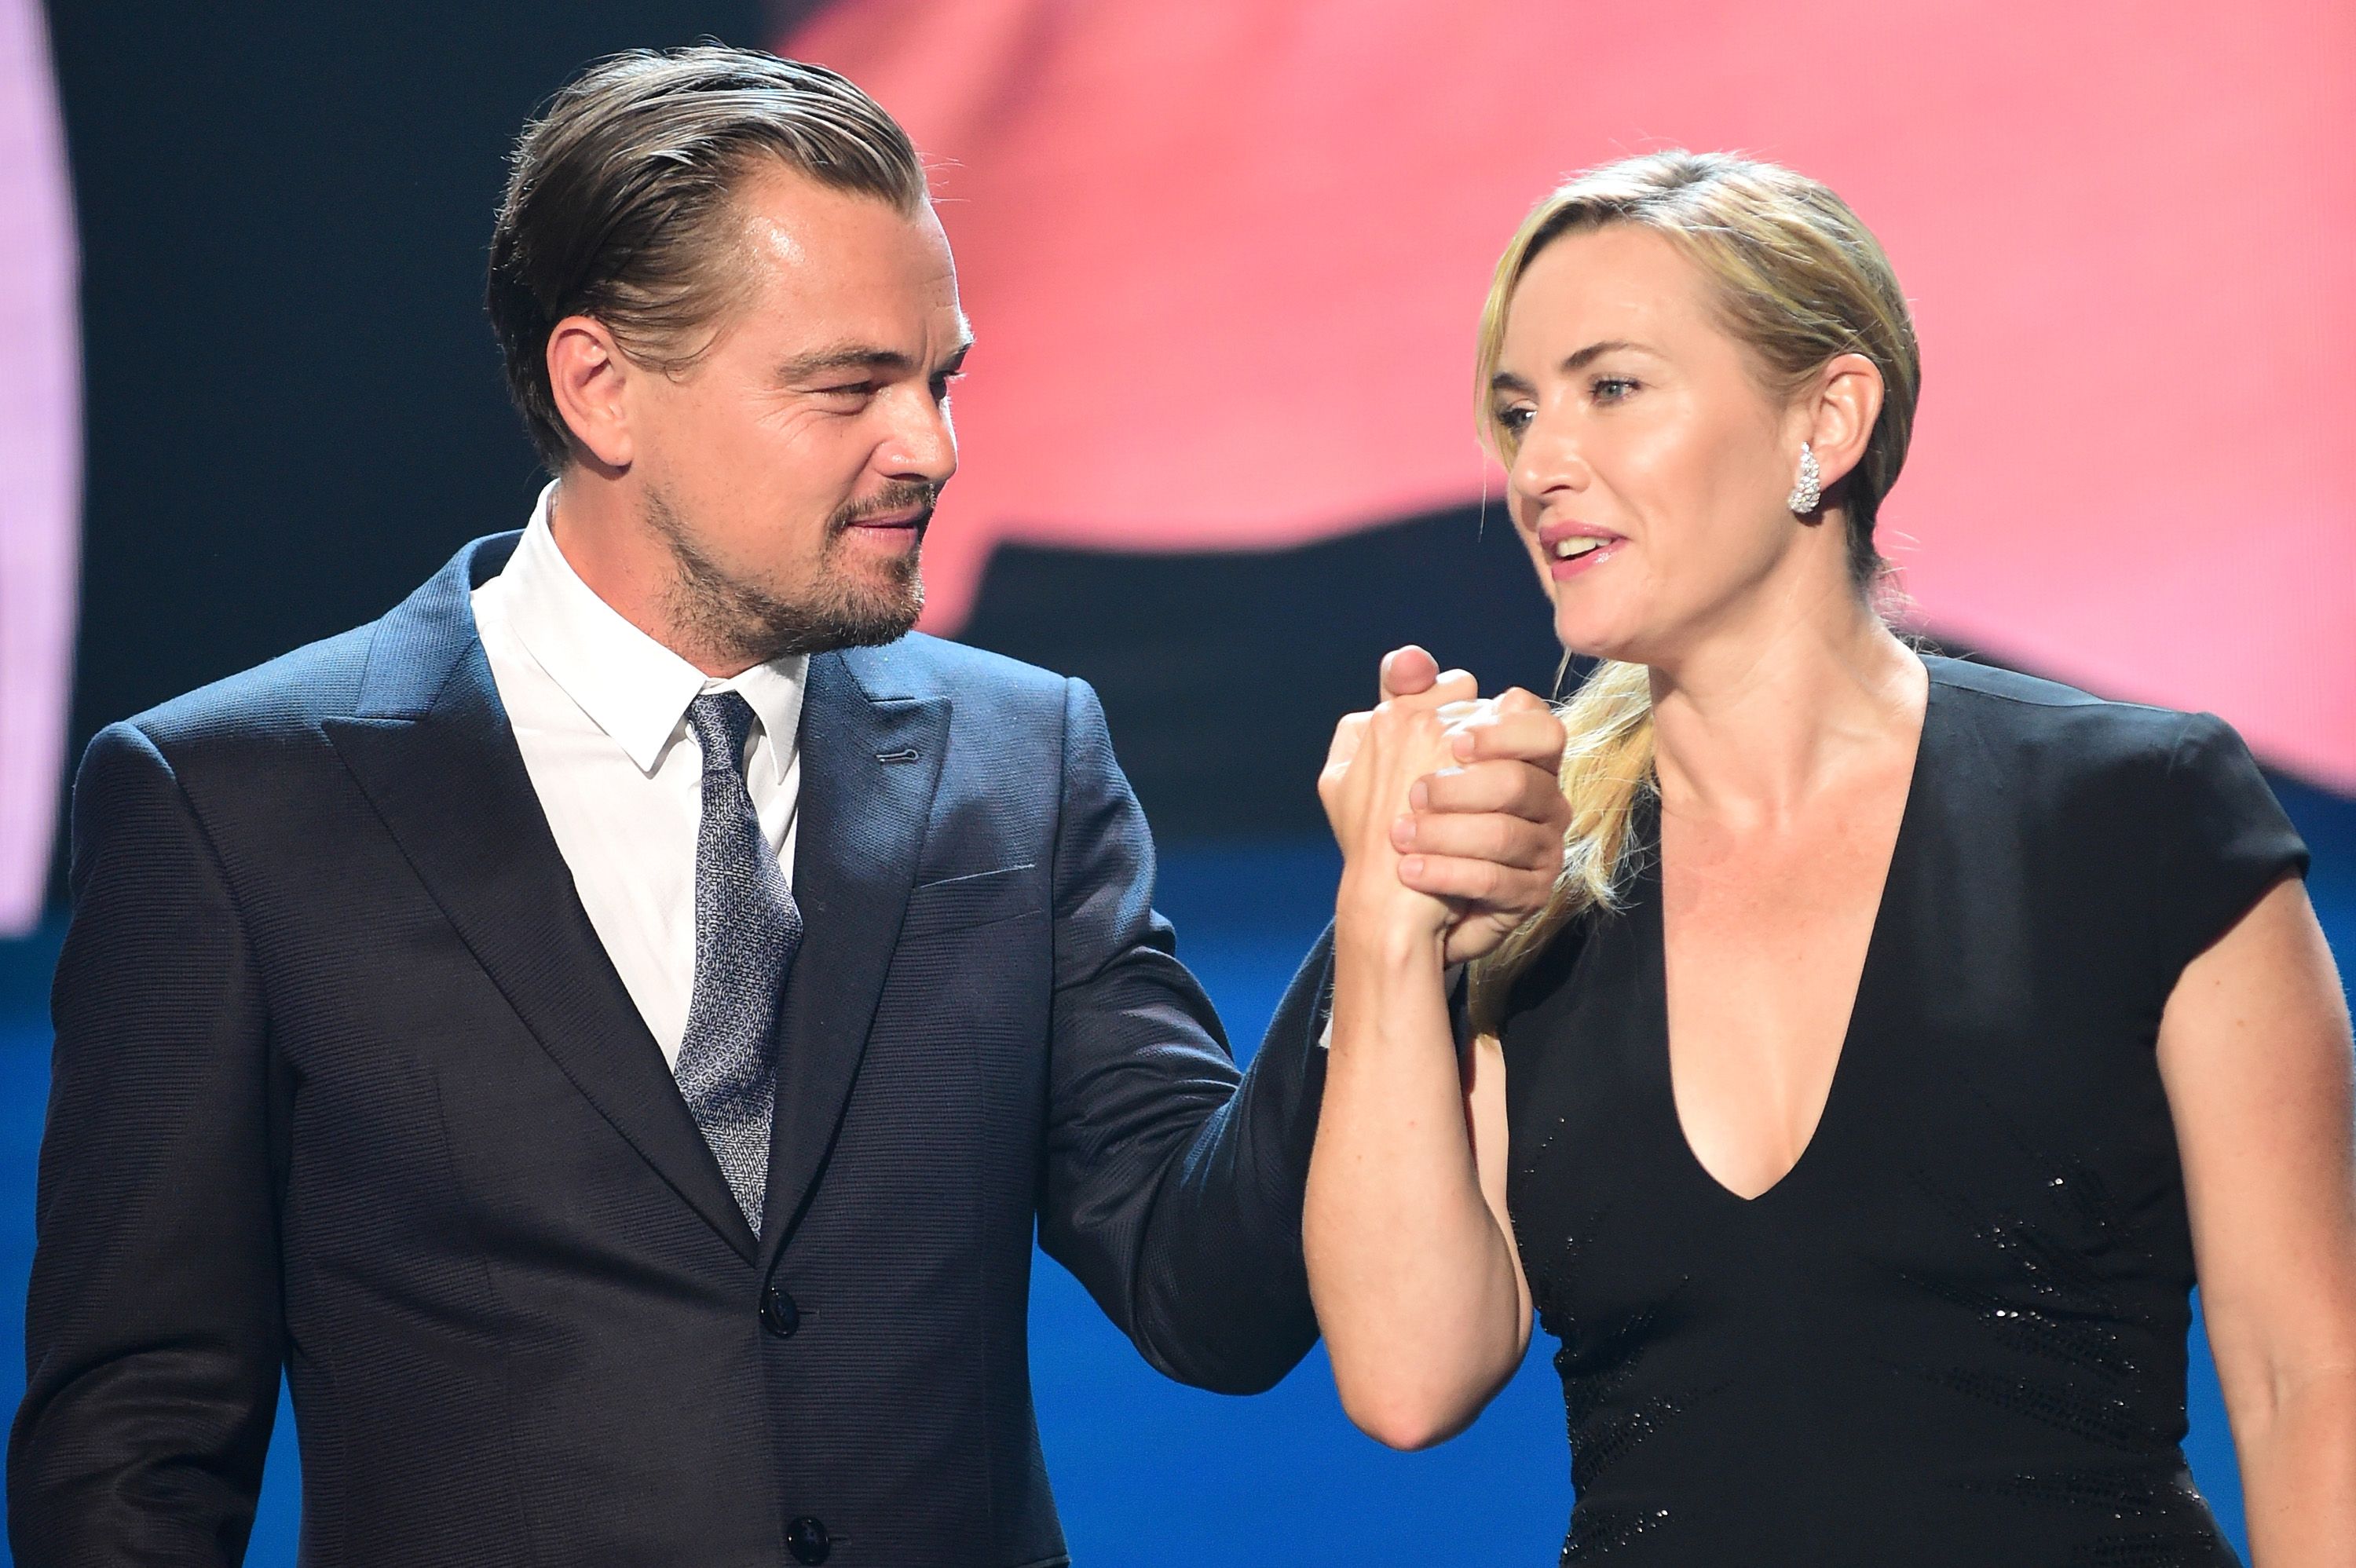 Kate Winslet "couldn't stop crying" in DiCaprio